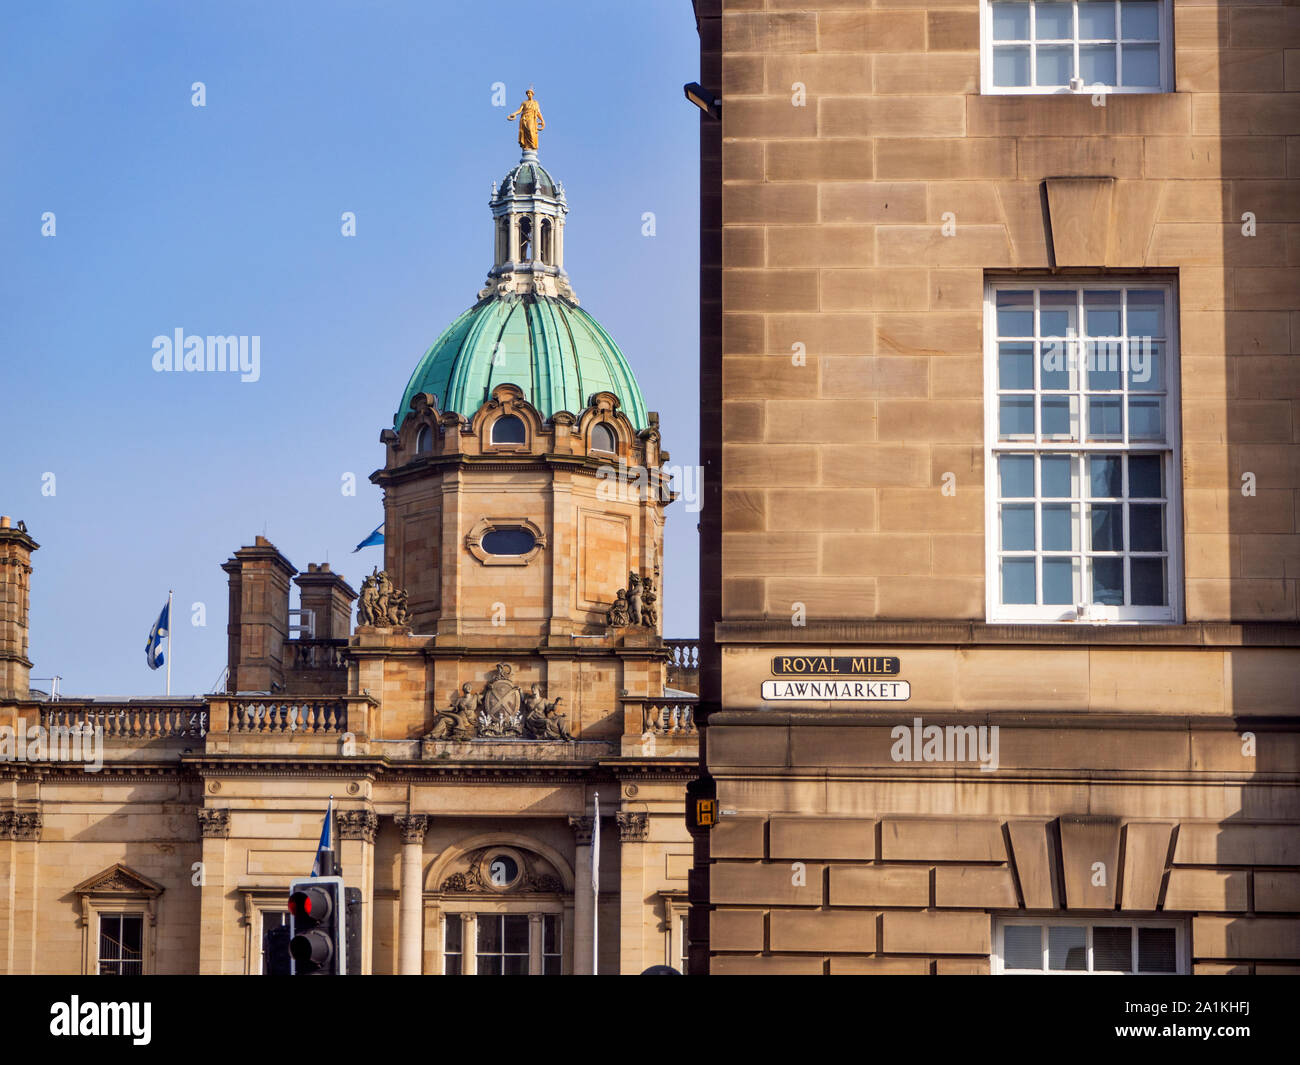 Bank of Scotland headquarters on The Mound viewed from The Royal Mile in Edinburgh Scotland Stock Photo